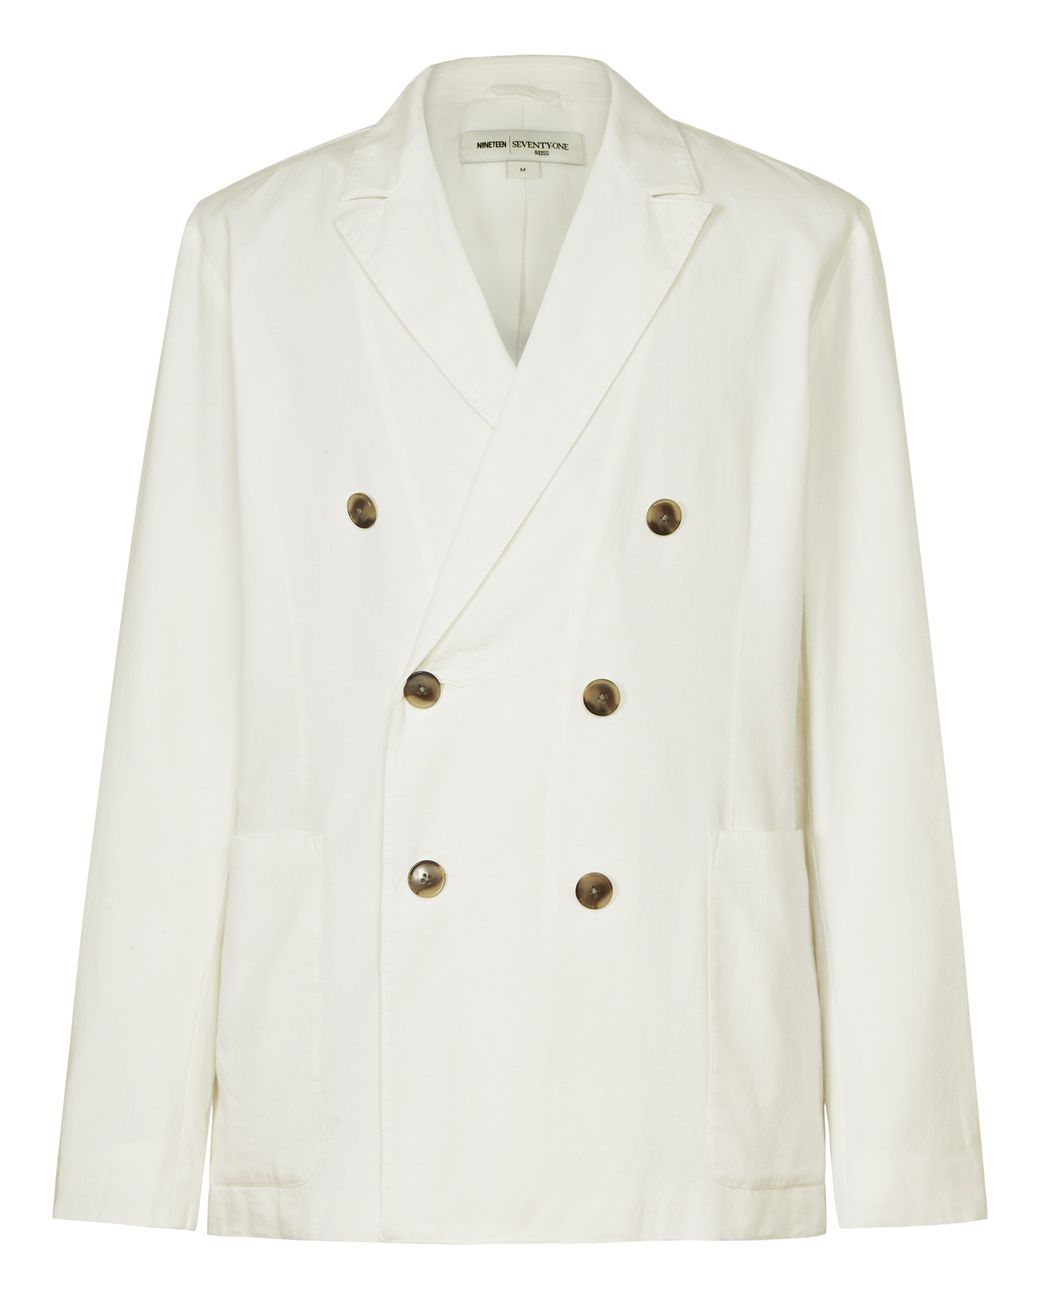 Reiss Parody Double Breasted Shirt Jacket in White for Men | Lyst